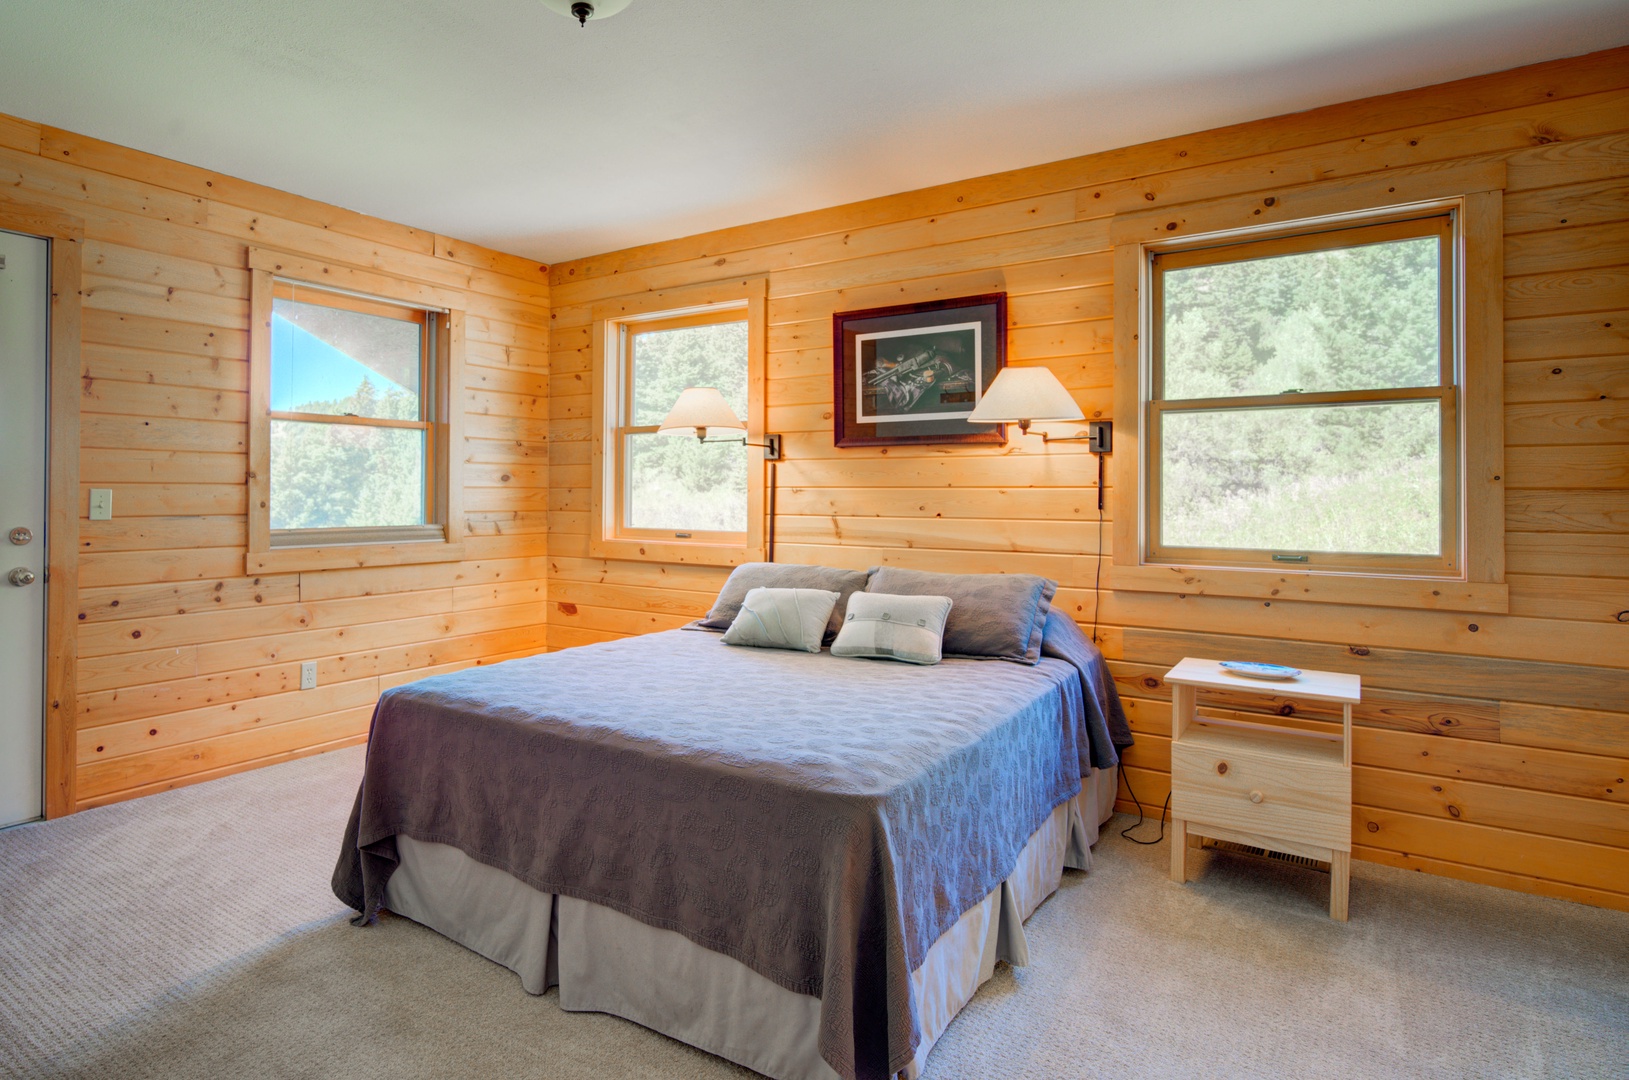 Bozeman Vacation Rentals, The Canyon Lookout - Primary bedroom with storage and views